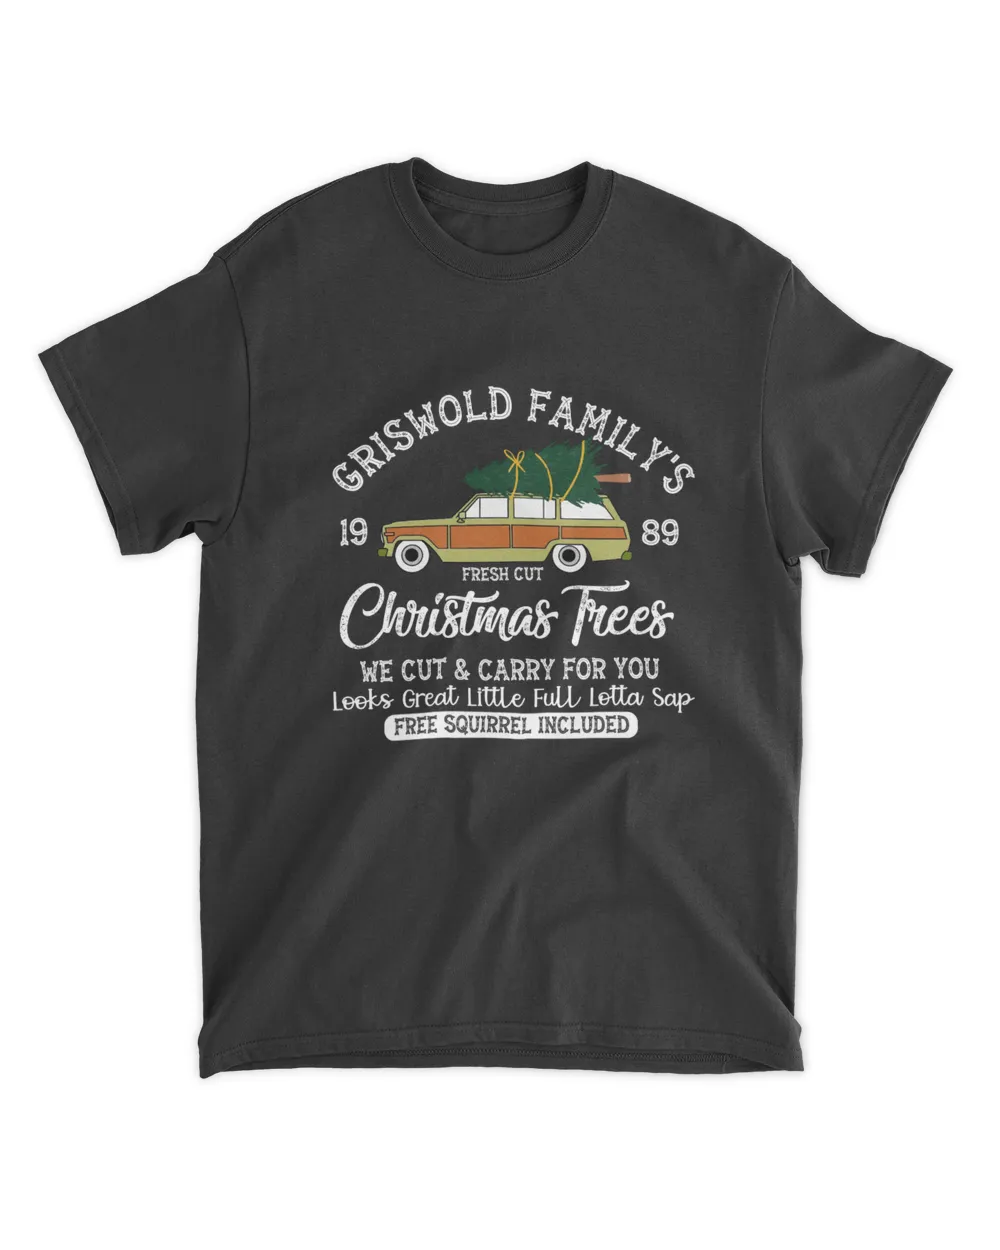 RD Griswold's Xmas Trees Shirt, National Lampoon's Christmas Vacation, Griswold Family Shirt